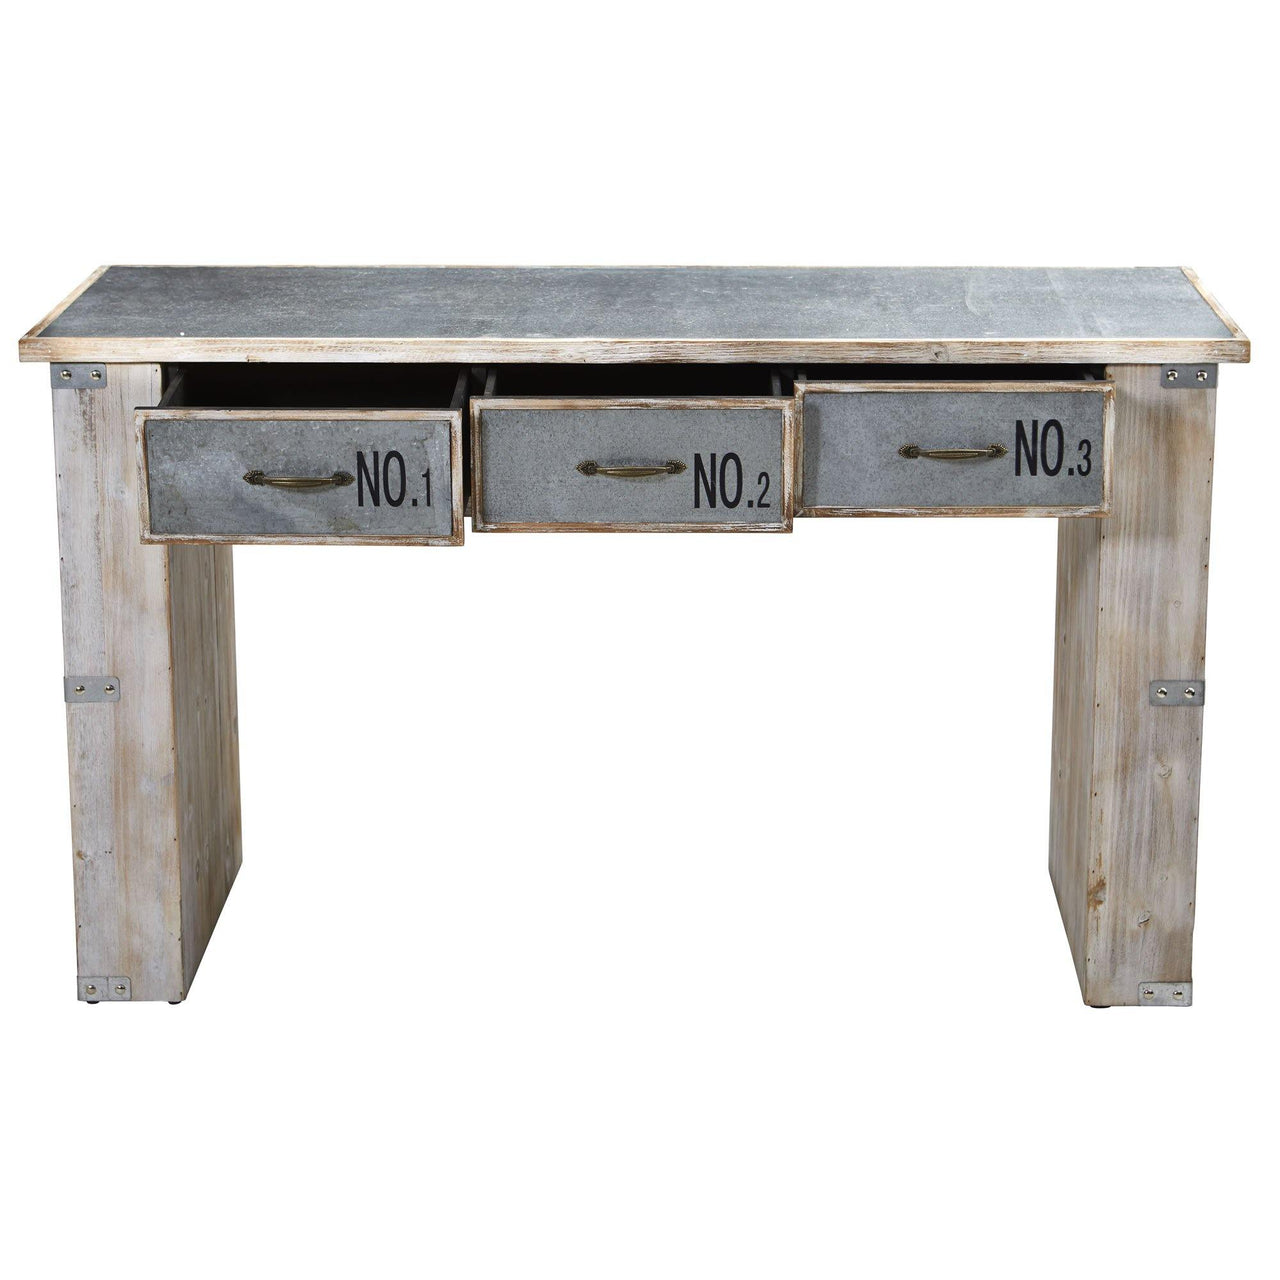 32” Industrial White Wash Wood And Metal Desk - The Fox Decor